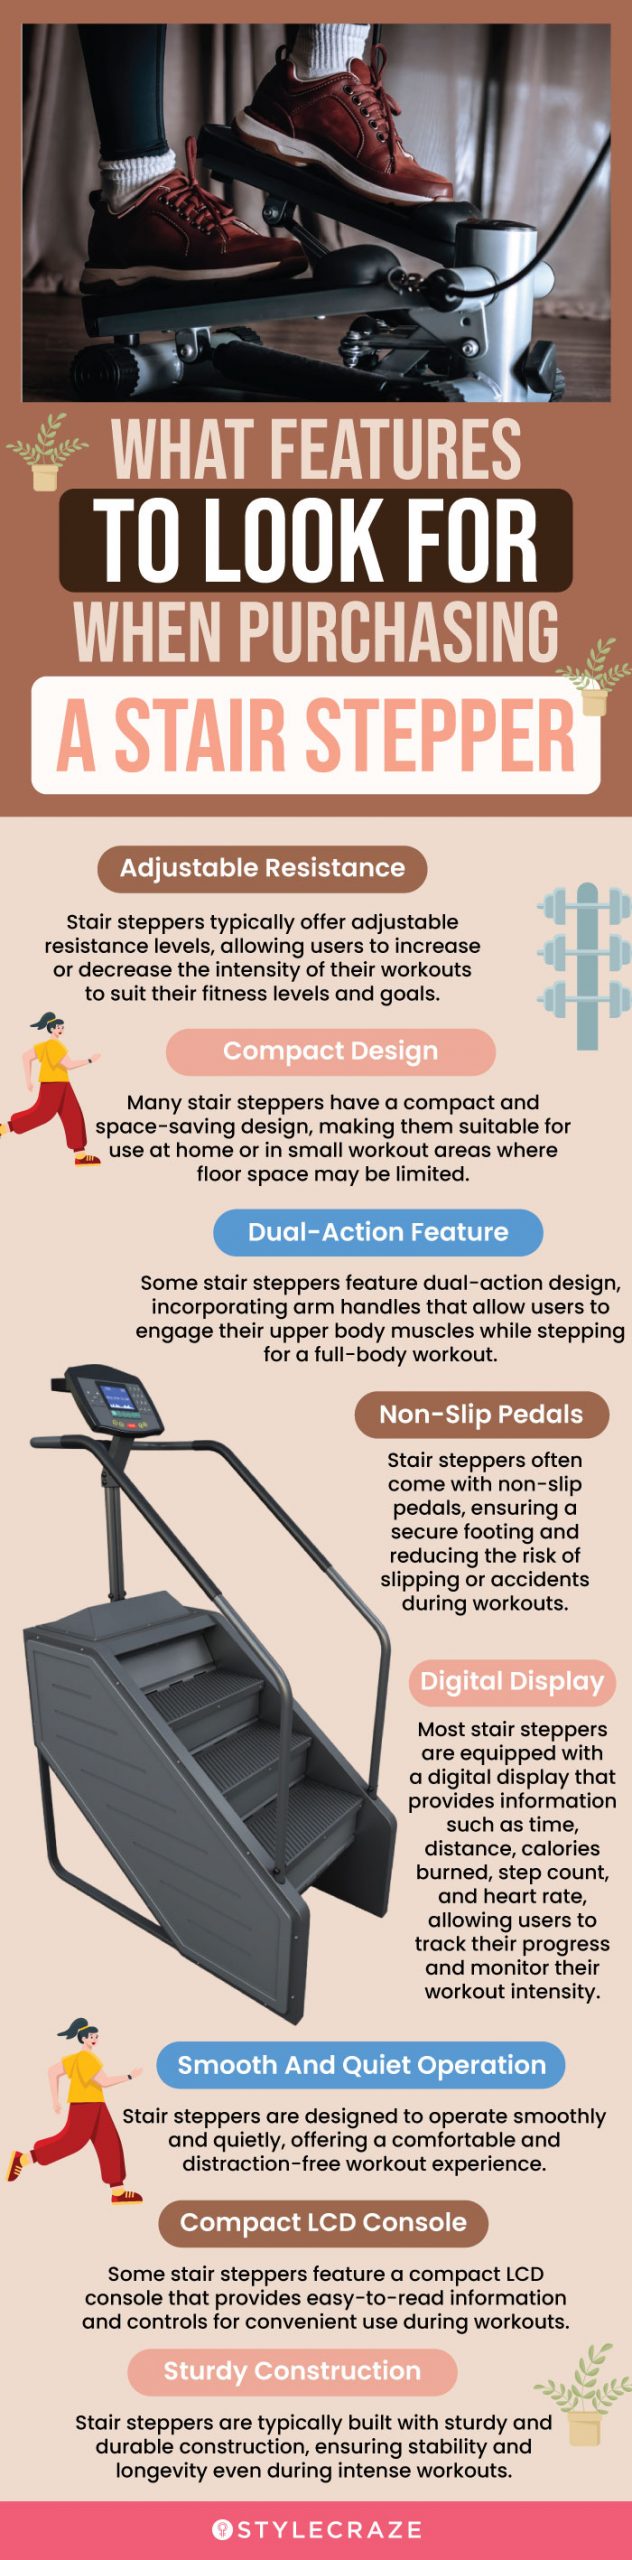 What Features To Look For When Purchasing A Stair Stepper (infographic)